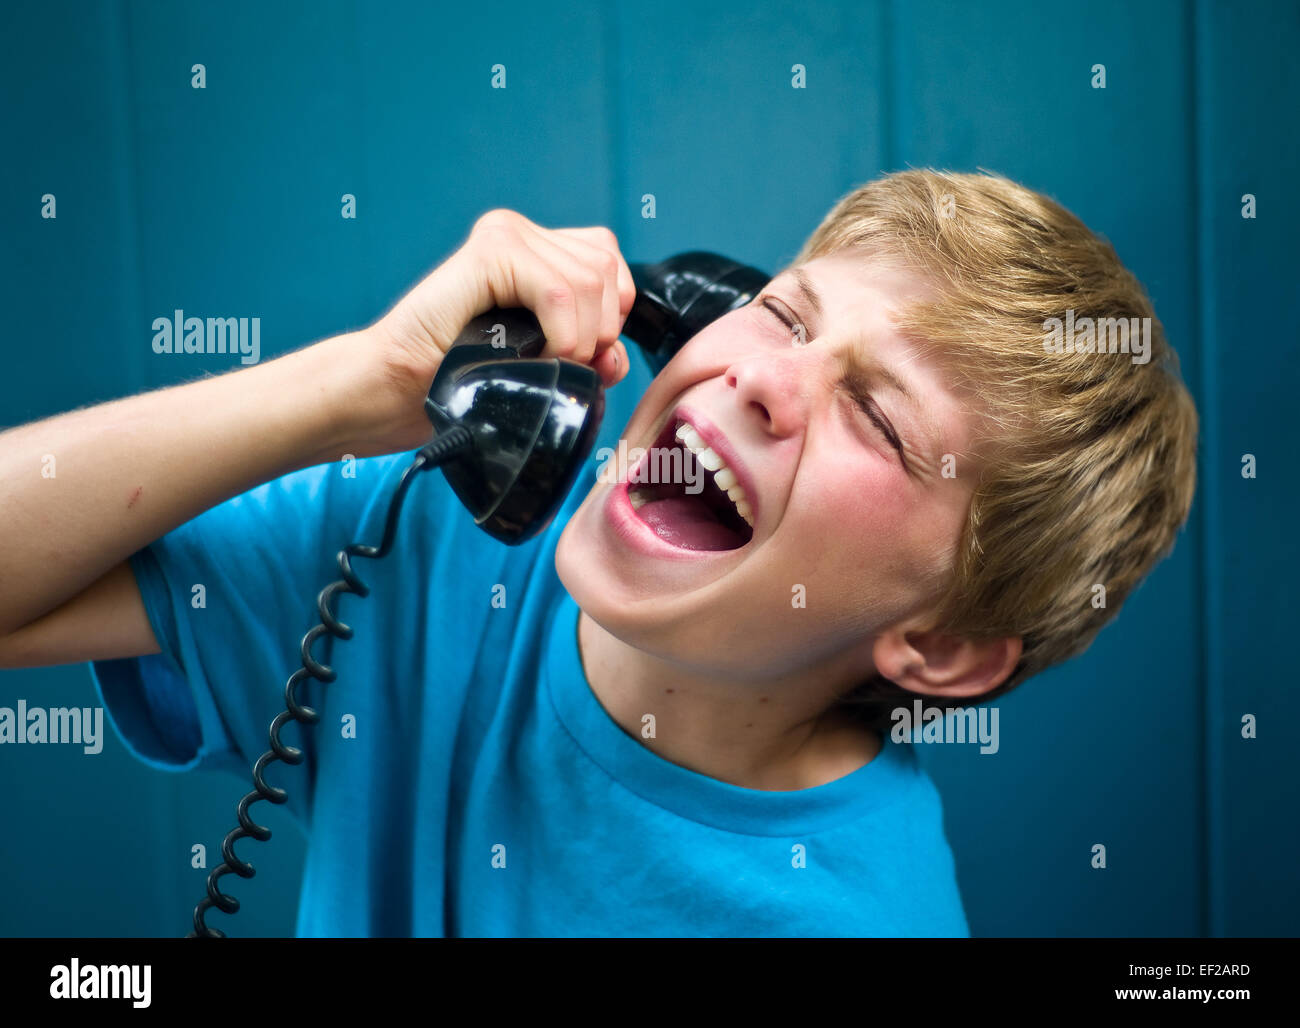 Child 10,11,12,13 laughing while talking on telephone, holding receiver Stock Photo